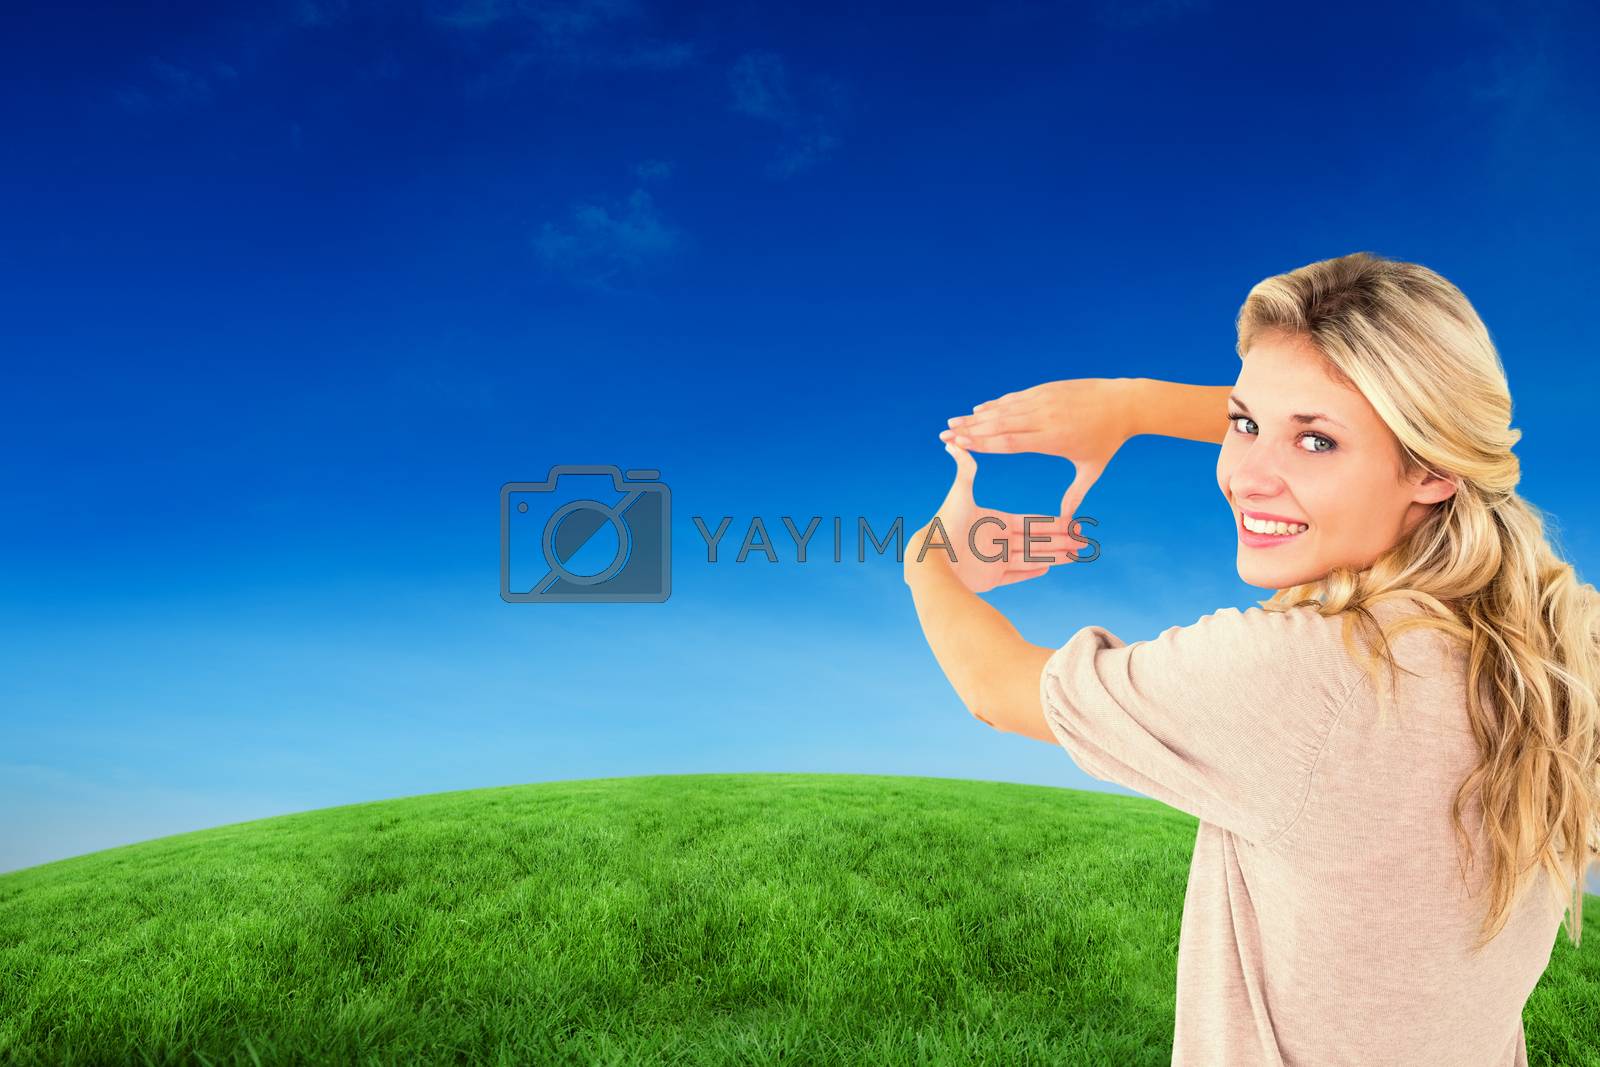 Royalty free image of Composite image of attractive young blonde framing with her hands by Wavebreakmedia